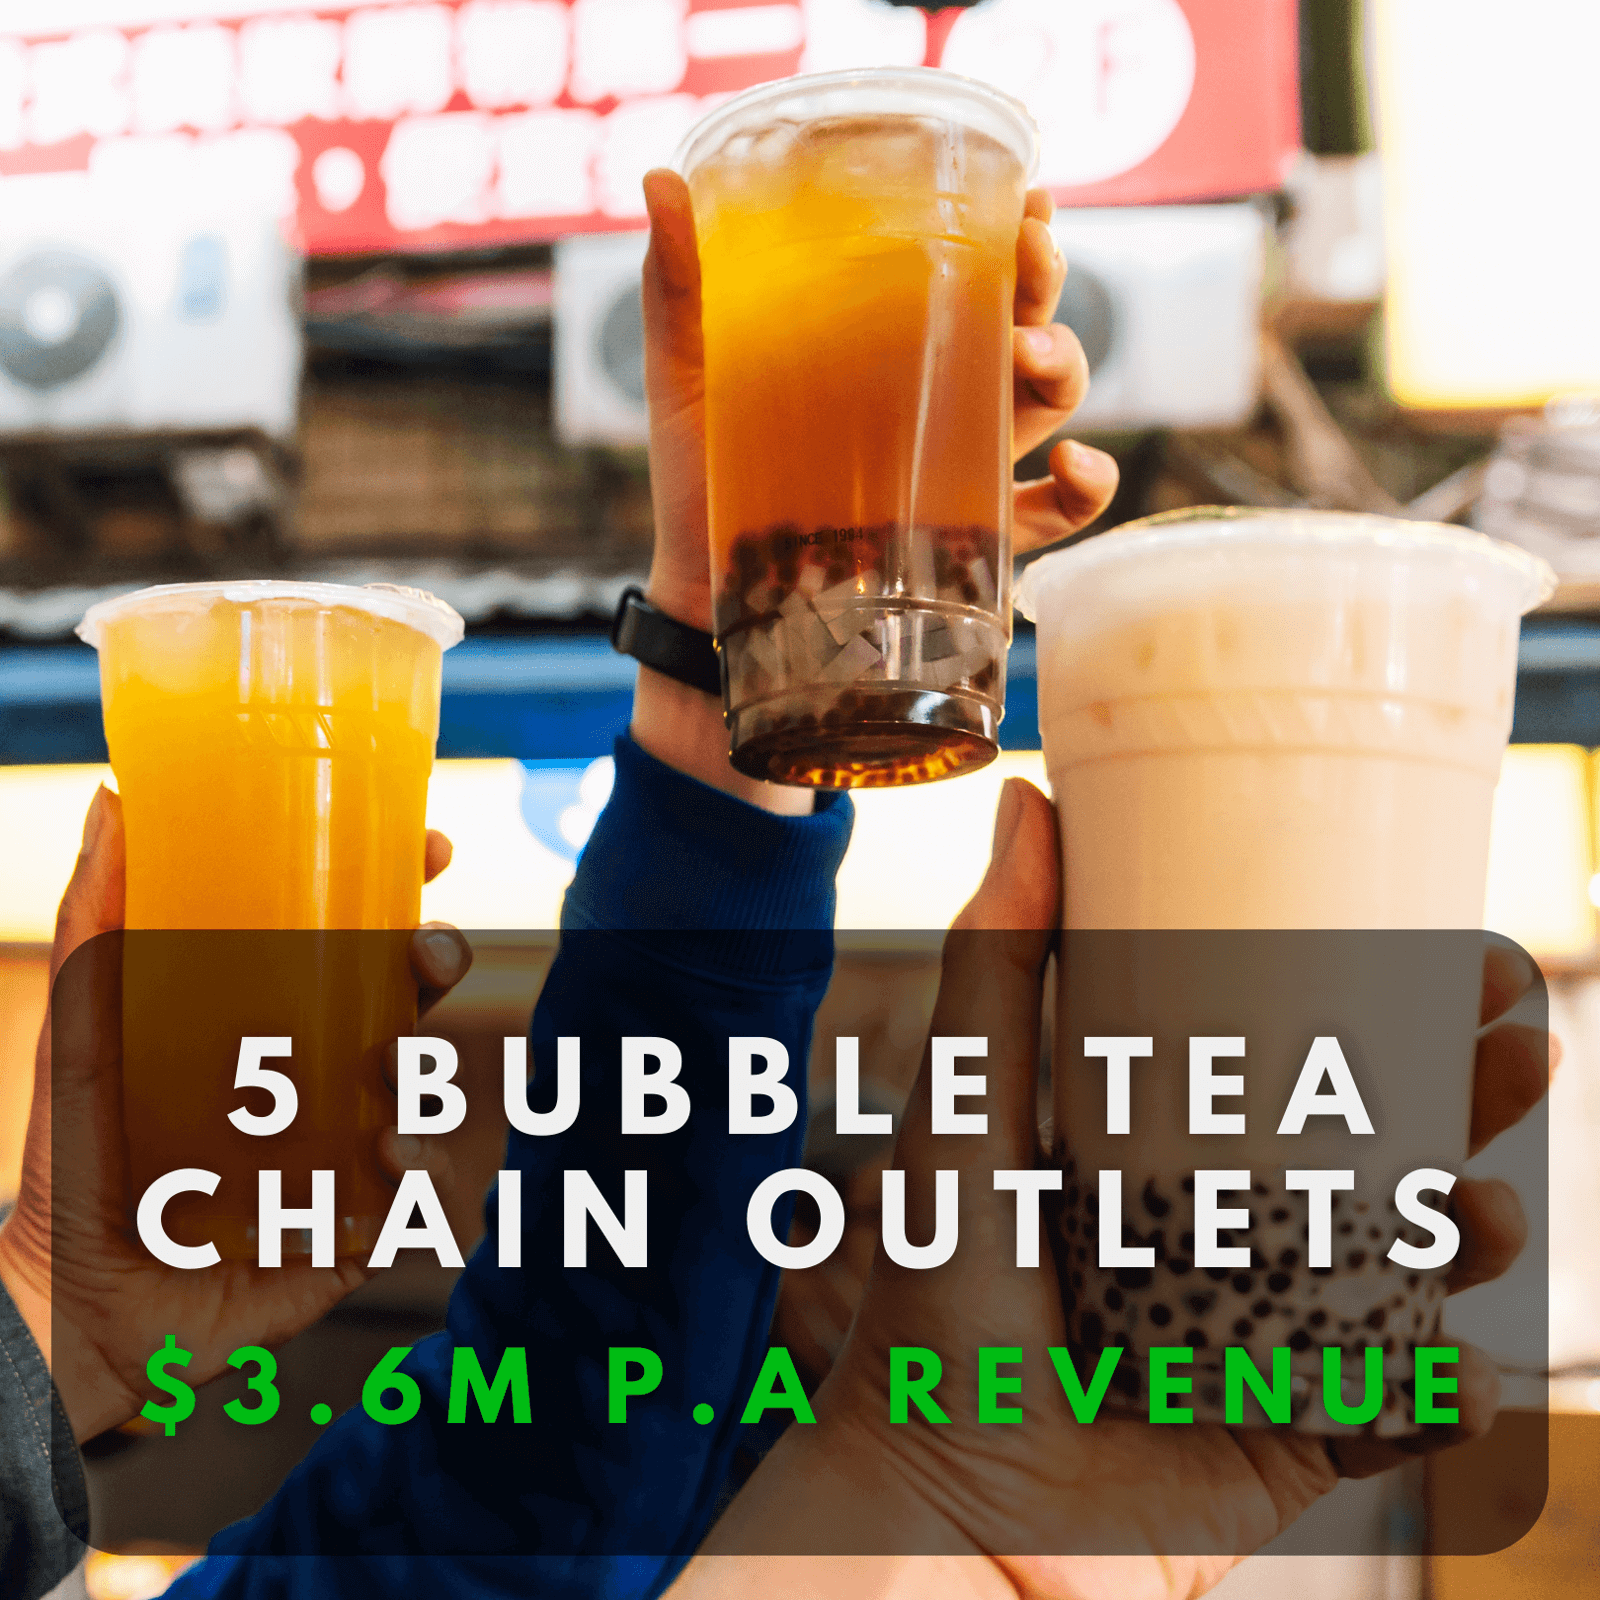 (Sold) 5 Bubble Tea Stores Locally | $3.6M Yearly Revenue | Owner Retiring For Good